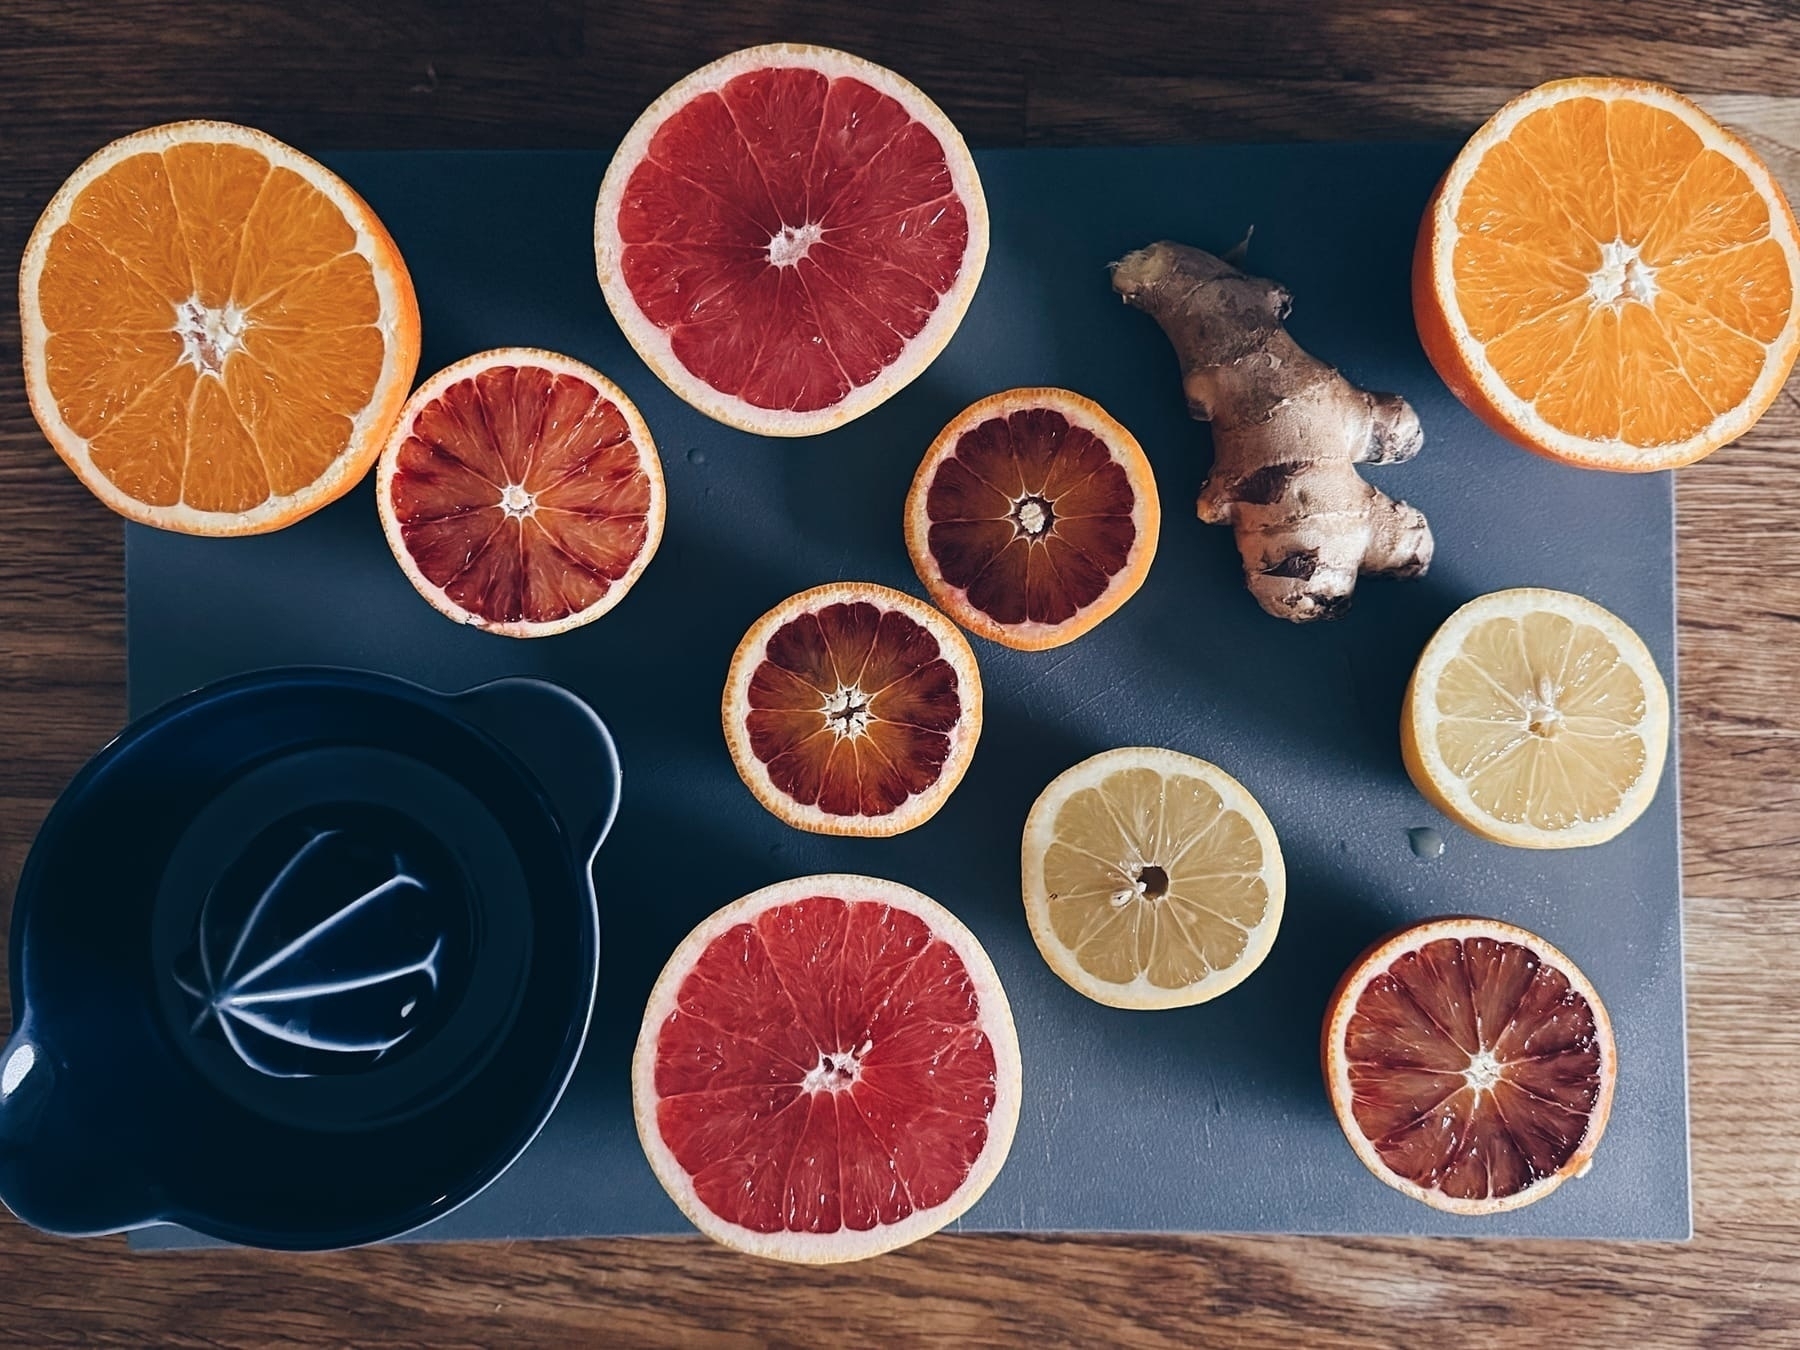 Sliced oranges, blood oranges, lemons, and a ginger on a cutting board with a juicer.